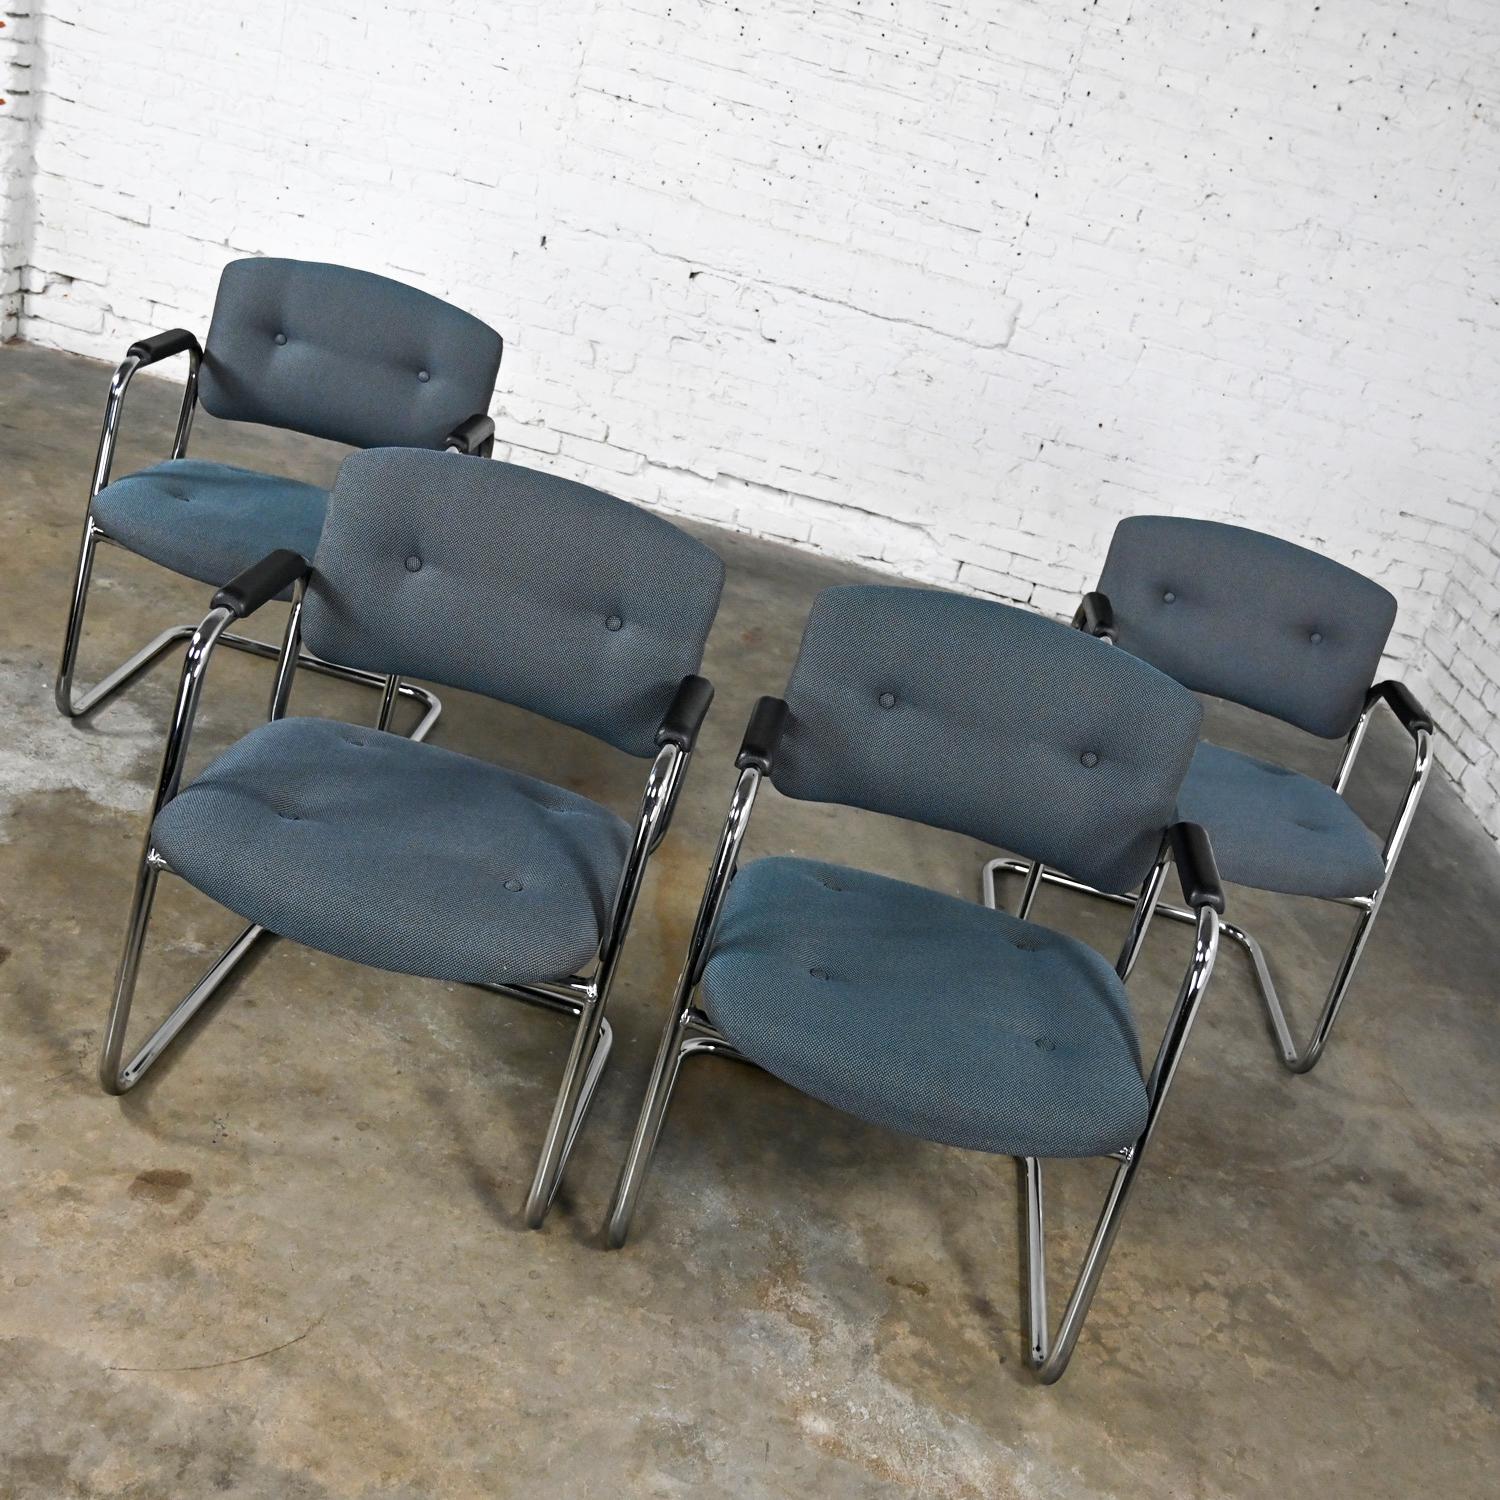 Awesome gray & chrome vintage cantilever chairs by United Chair Company in the style of Steelcase, set of 4. Comprised of a chrome cantilever frame, black plastic armrests, and their original gray tweed fabric with button details. This listing is